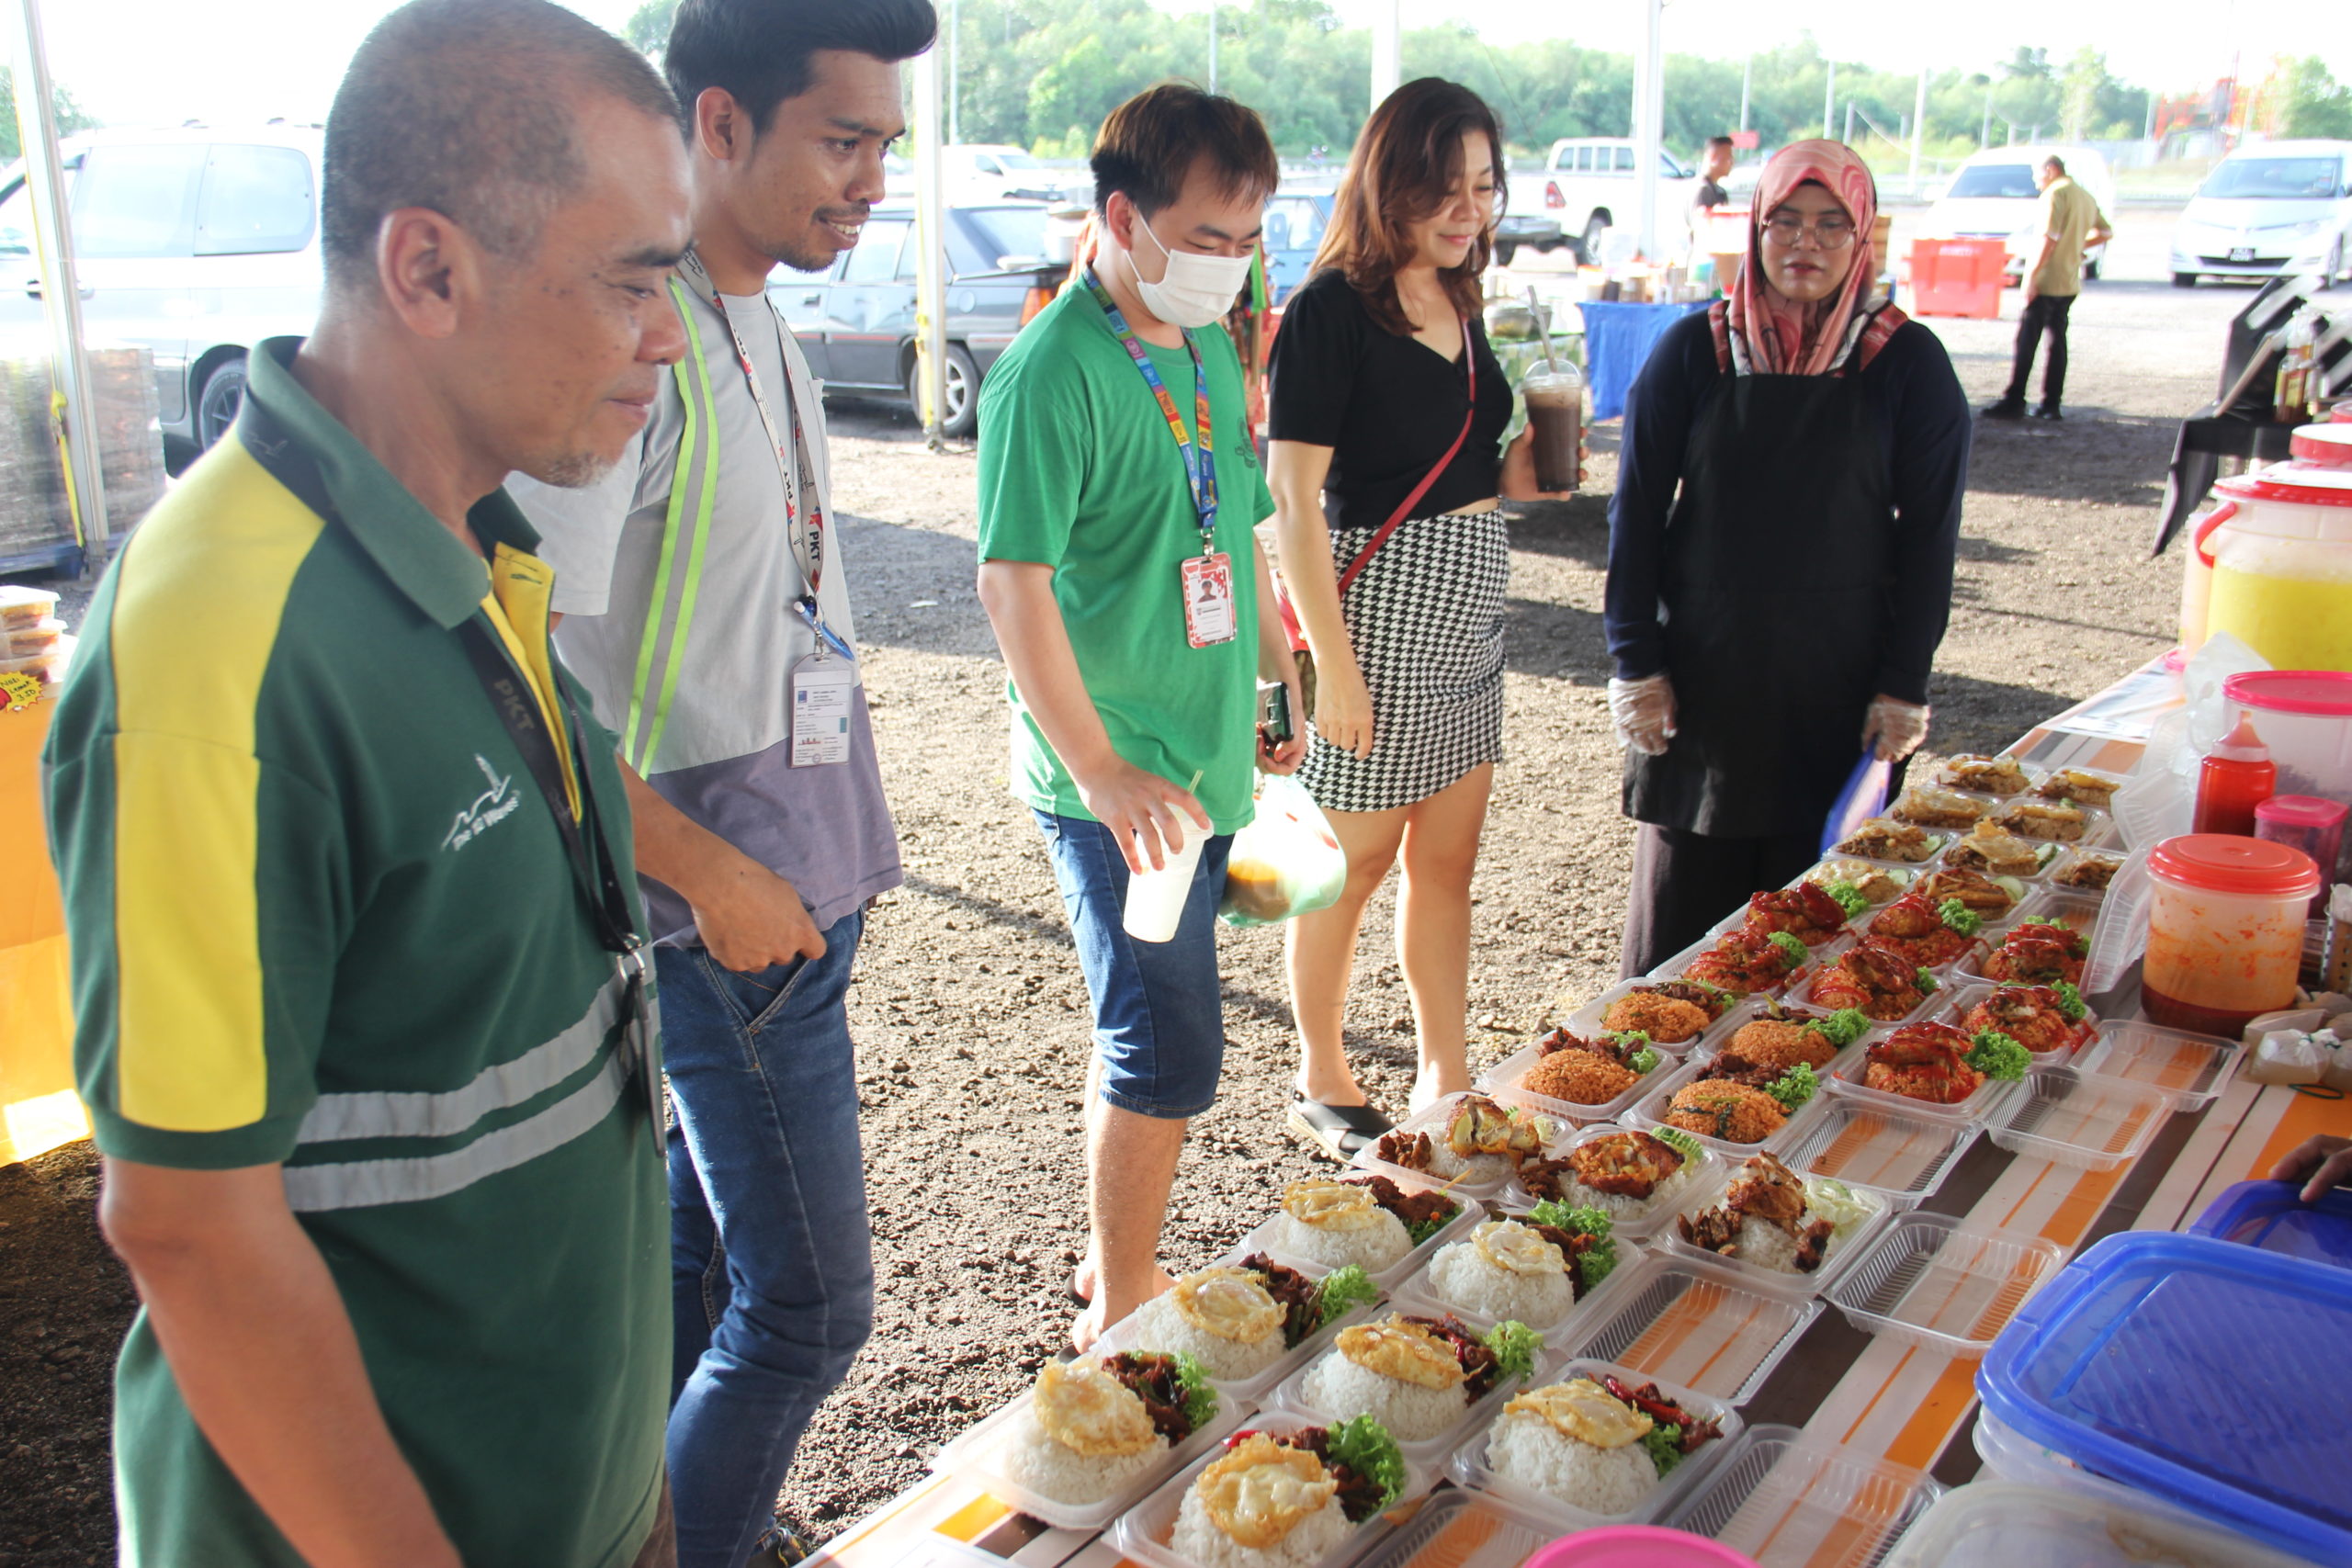 The Ramadan bazaar at Ship Campus attracts people of all ethnicities to taste.